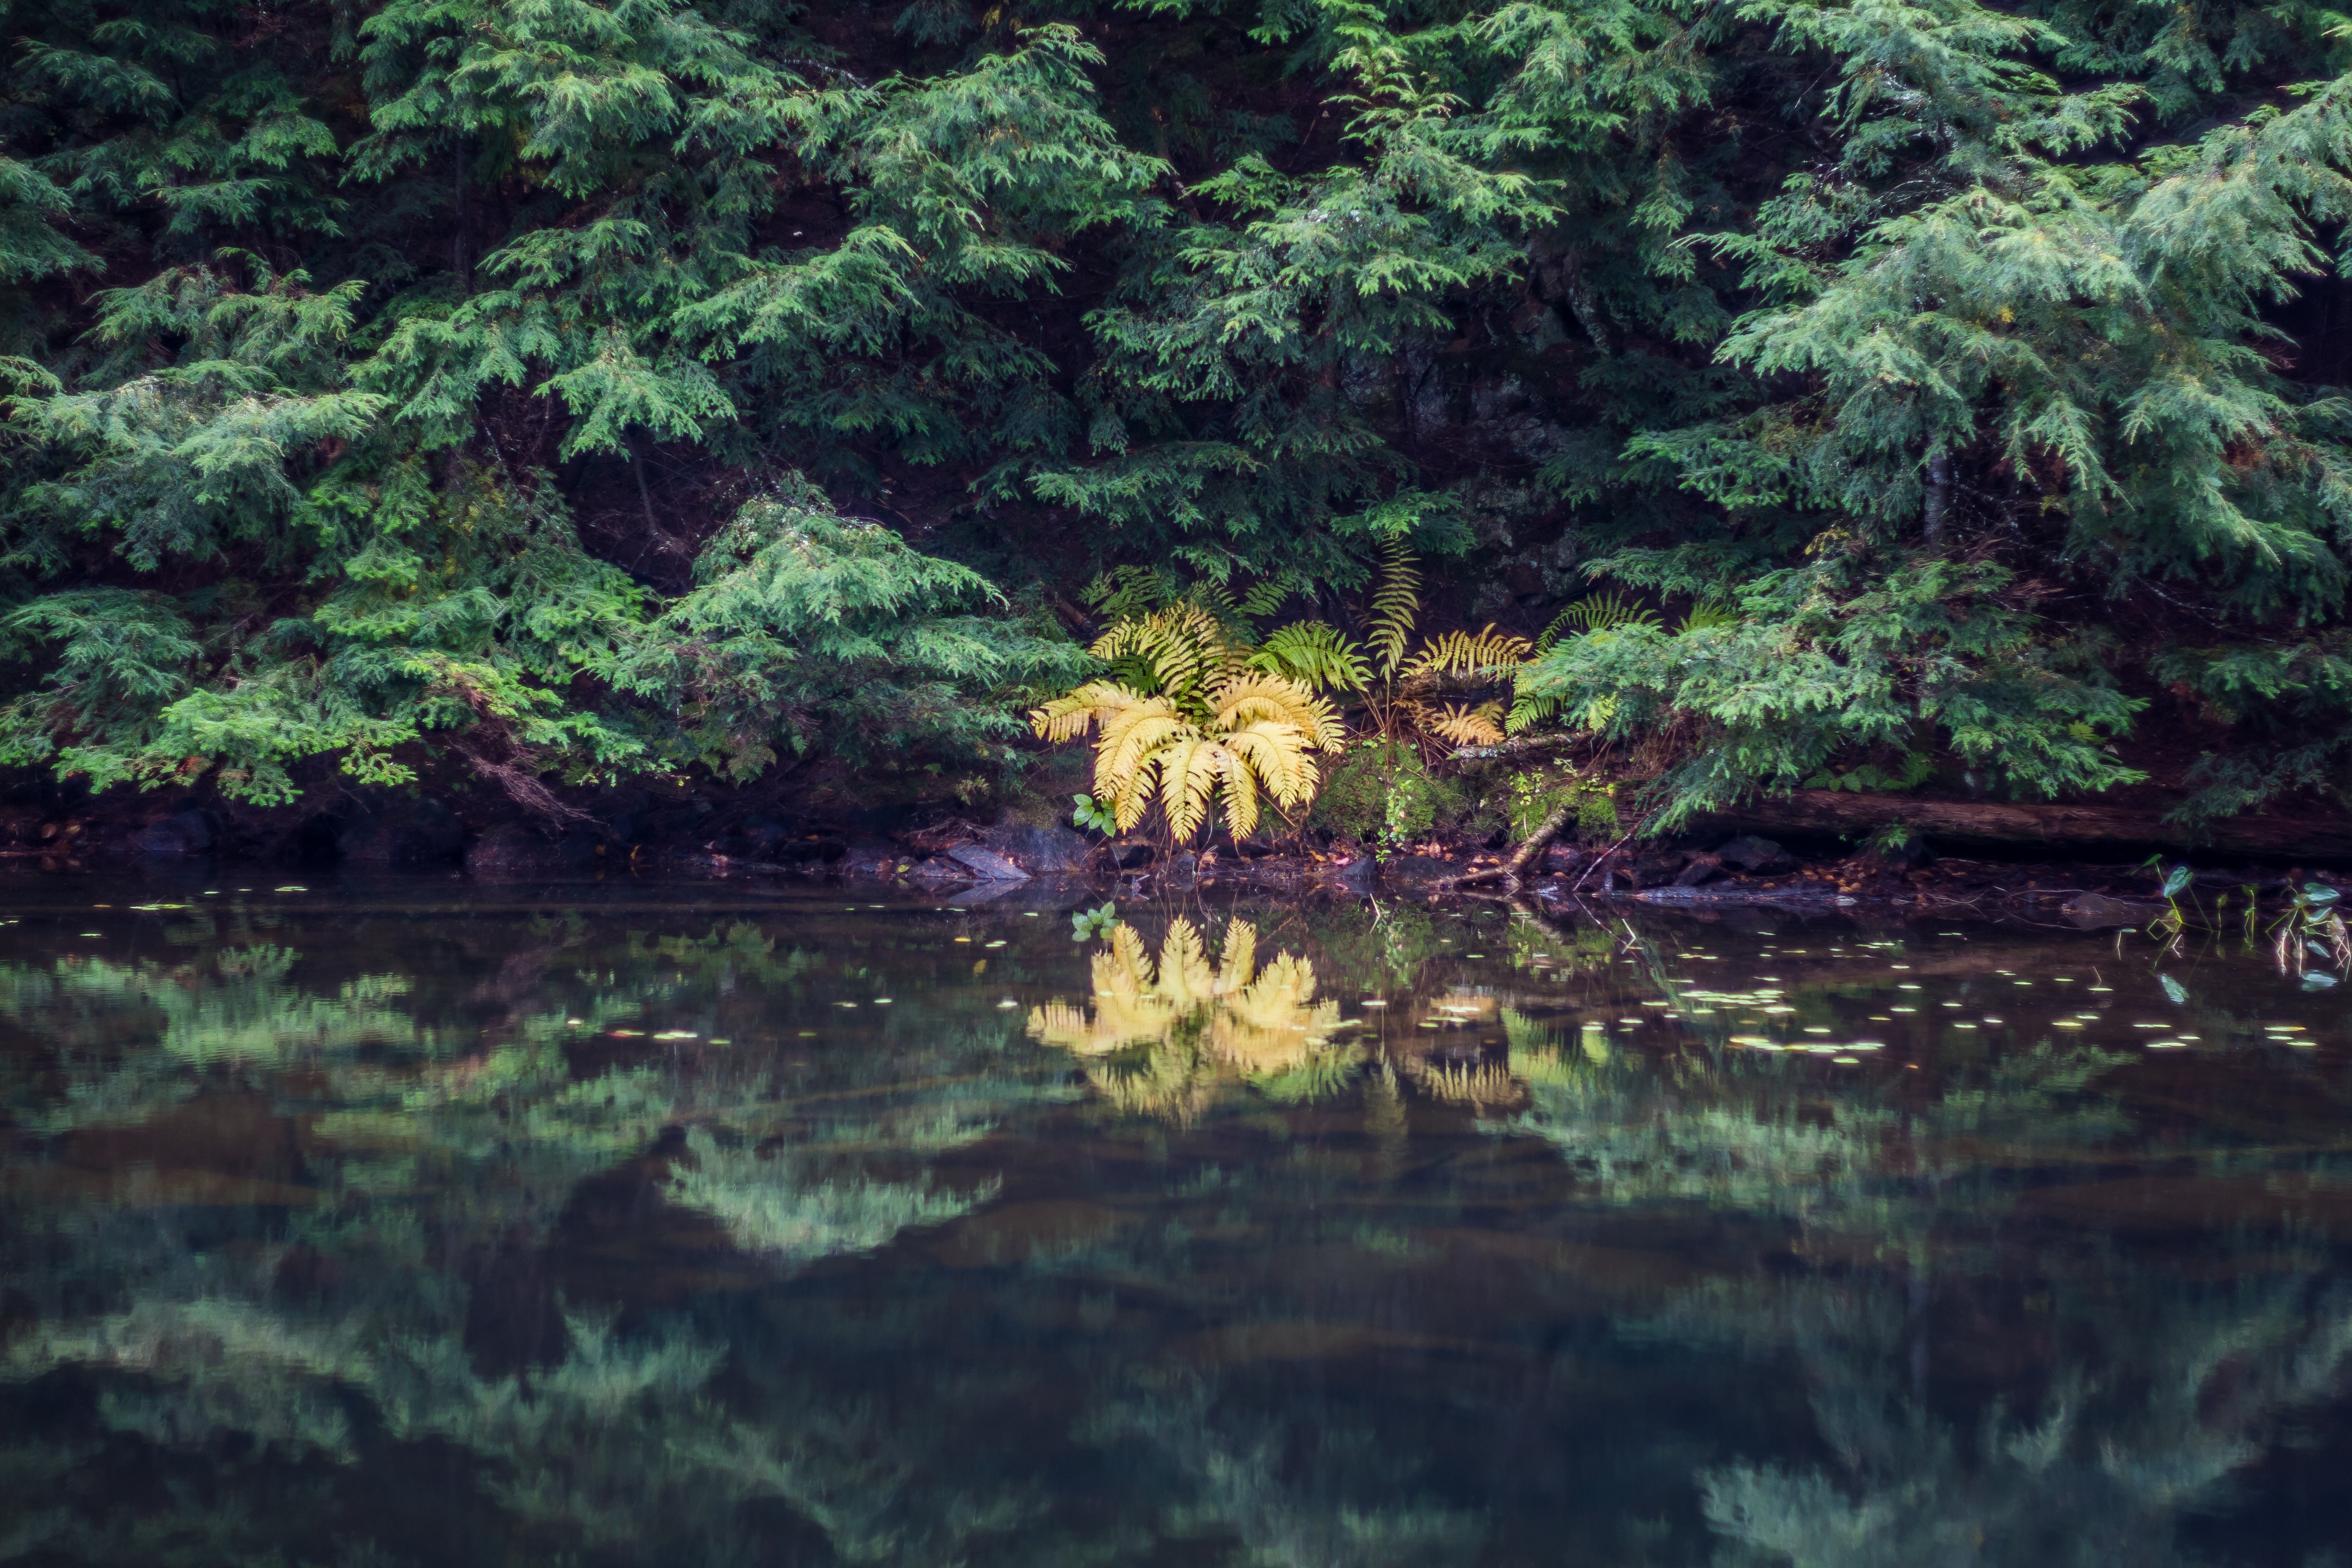 photo of yellow plants between green leafy plants beside body of water during day time